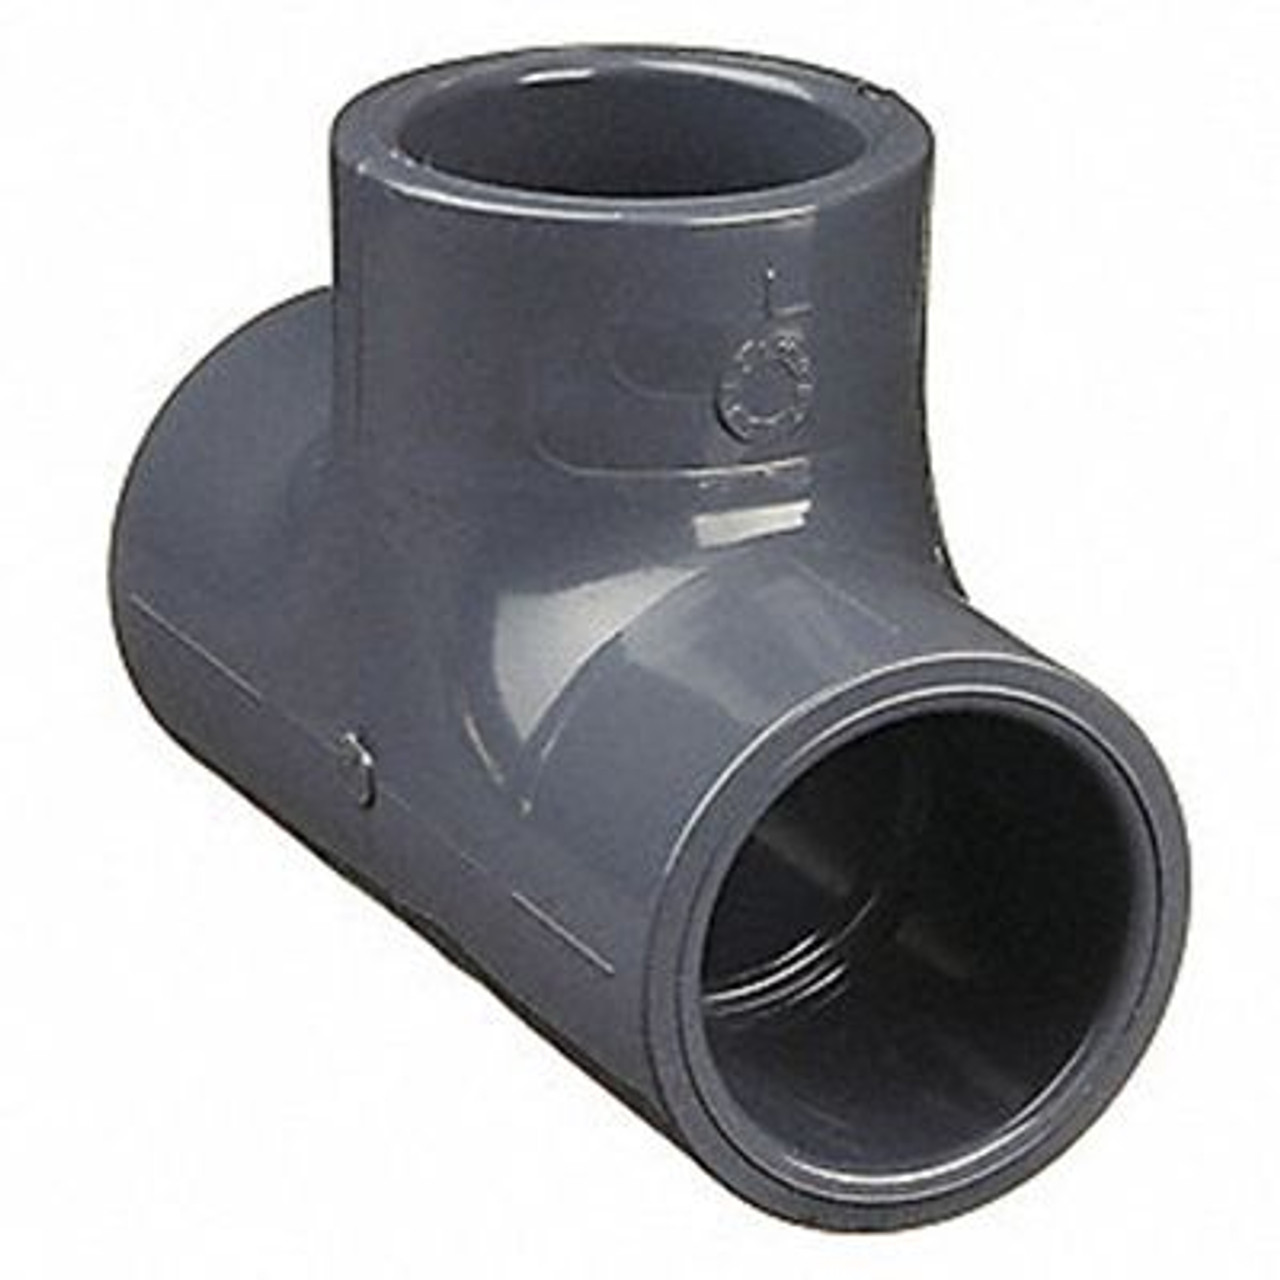 1-1/2 inch PVC tee, socket connection